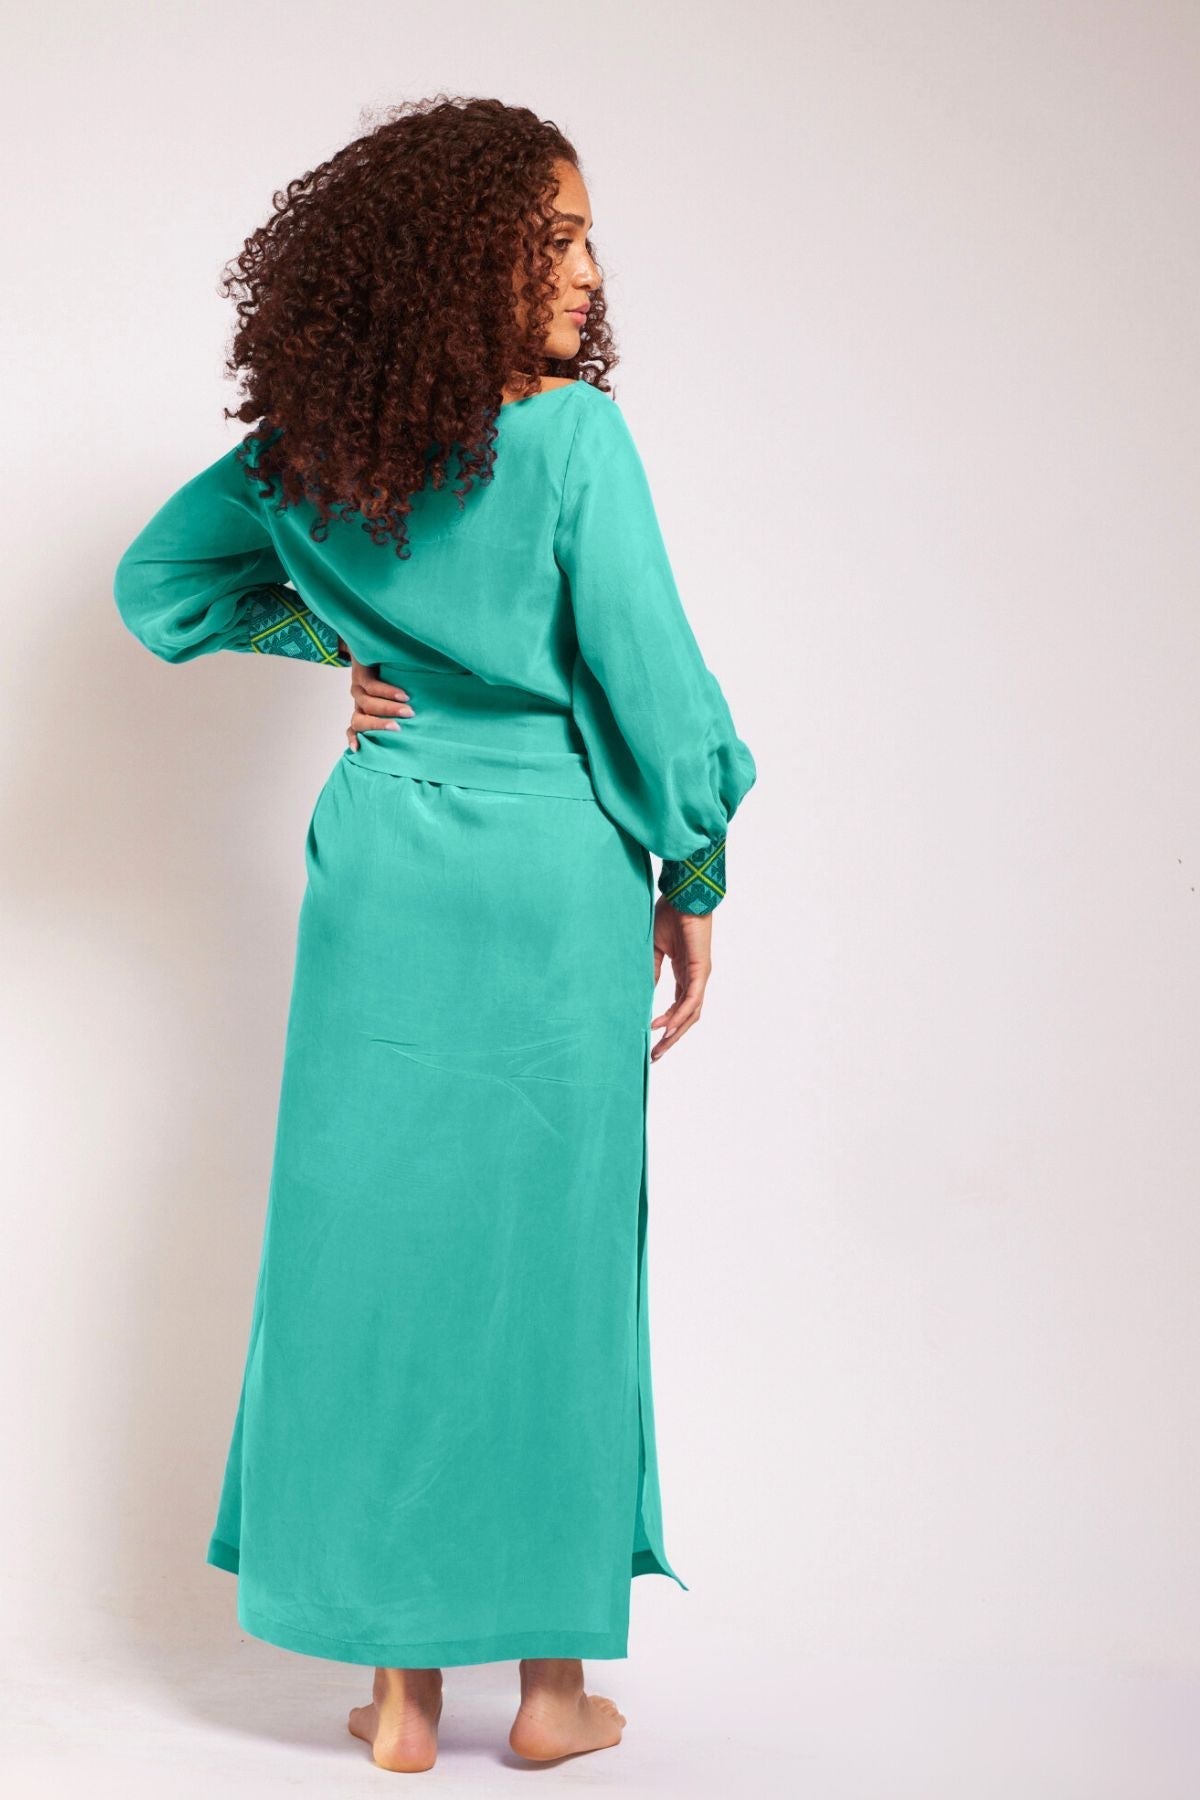 back view of woman wearing turquoise kaftan duster with embroidered sleeves made from recycled materials